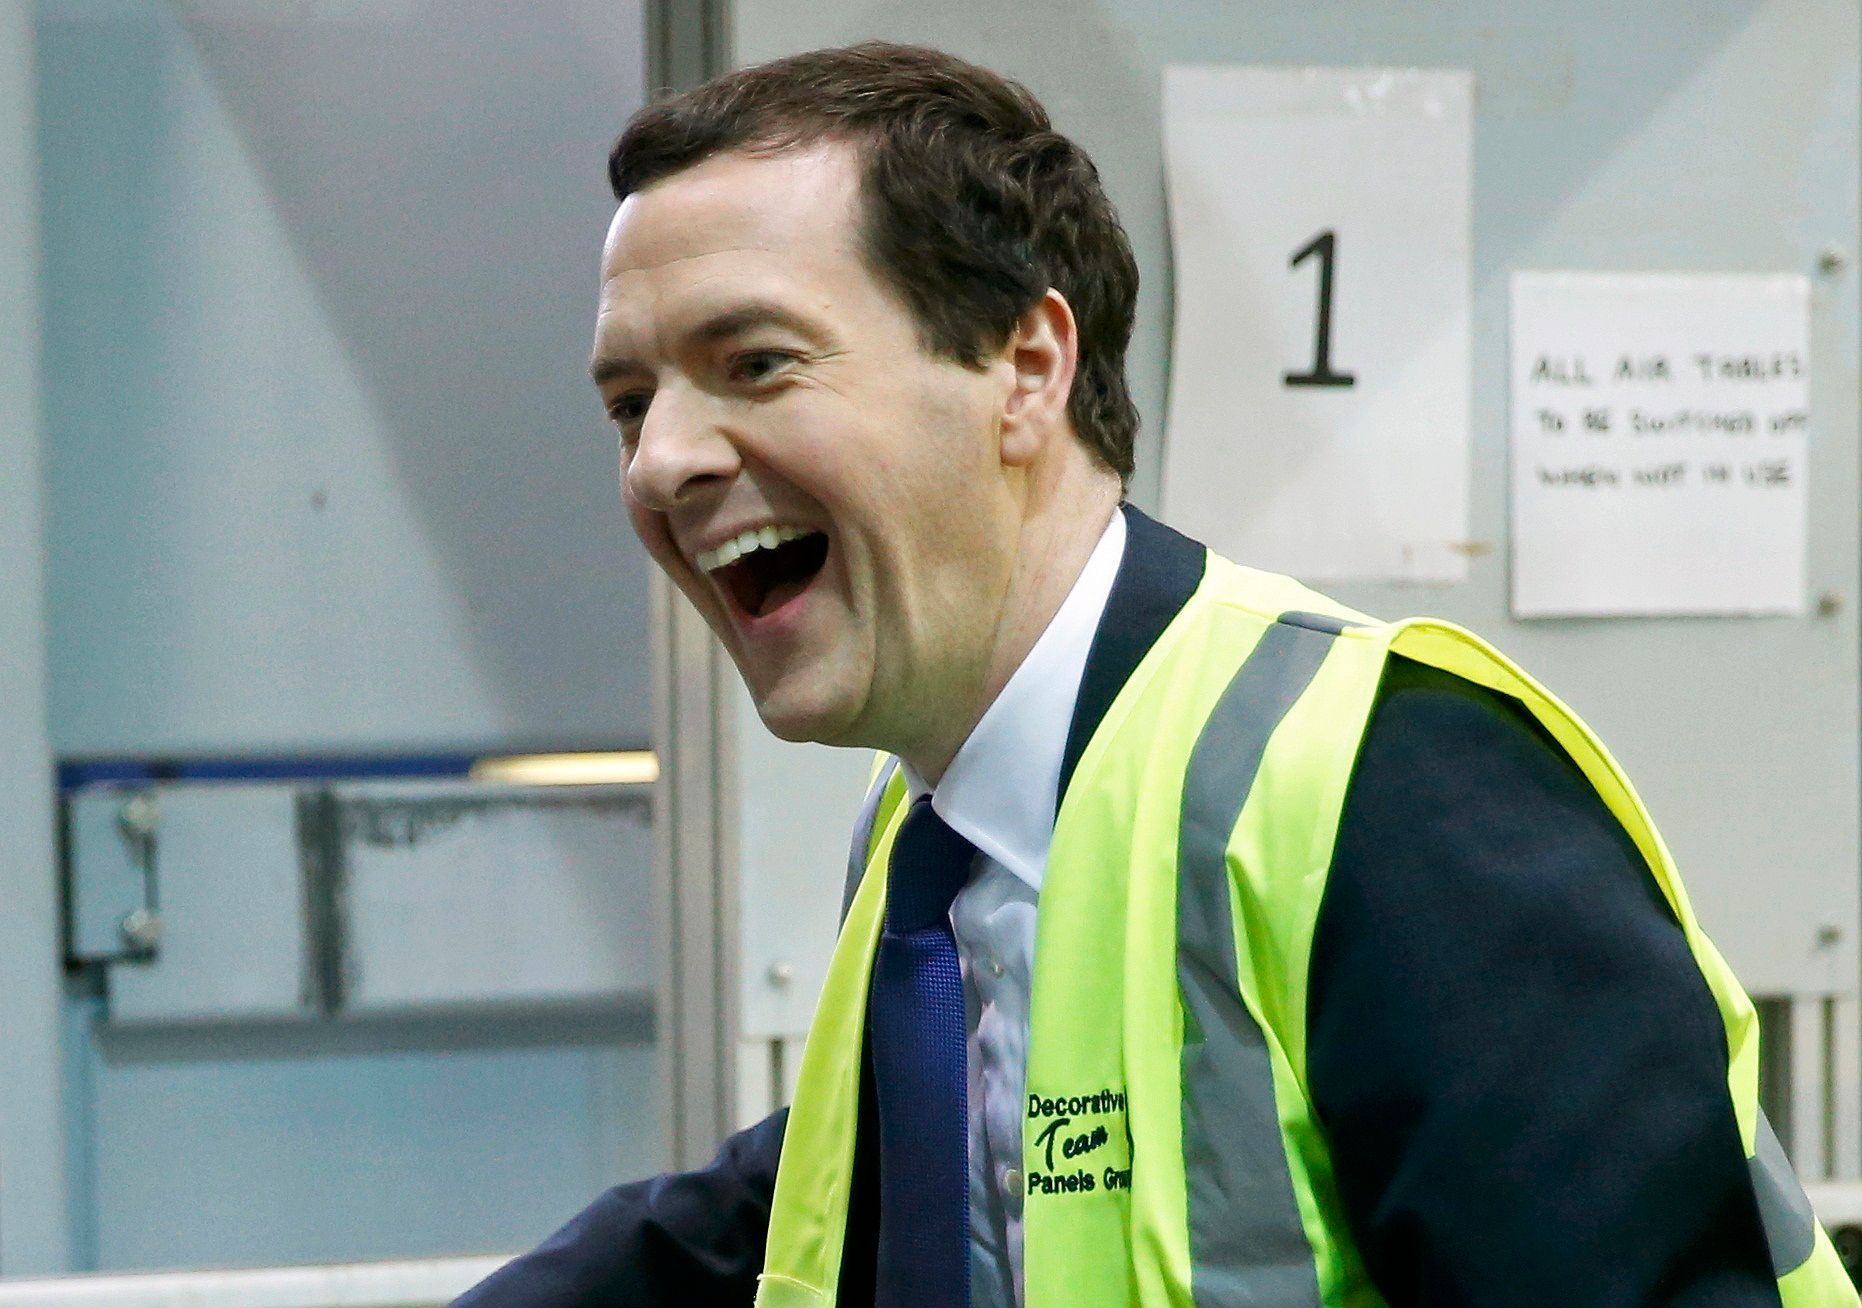 Britain's Chancellor of the Exchequer George Osborne laughs as he works on a production line of decorative panels at a factory in Stockton-on-Tees